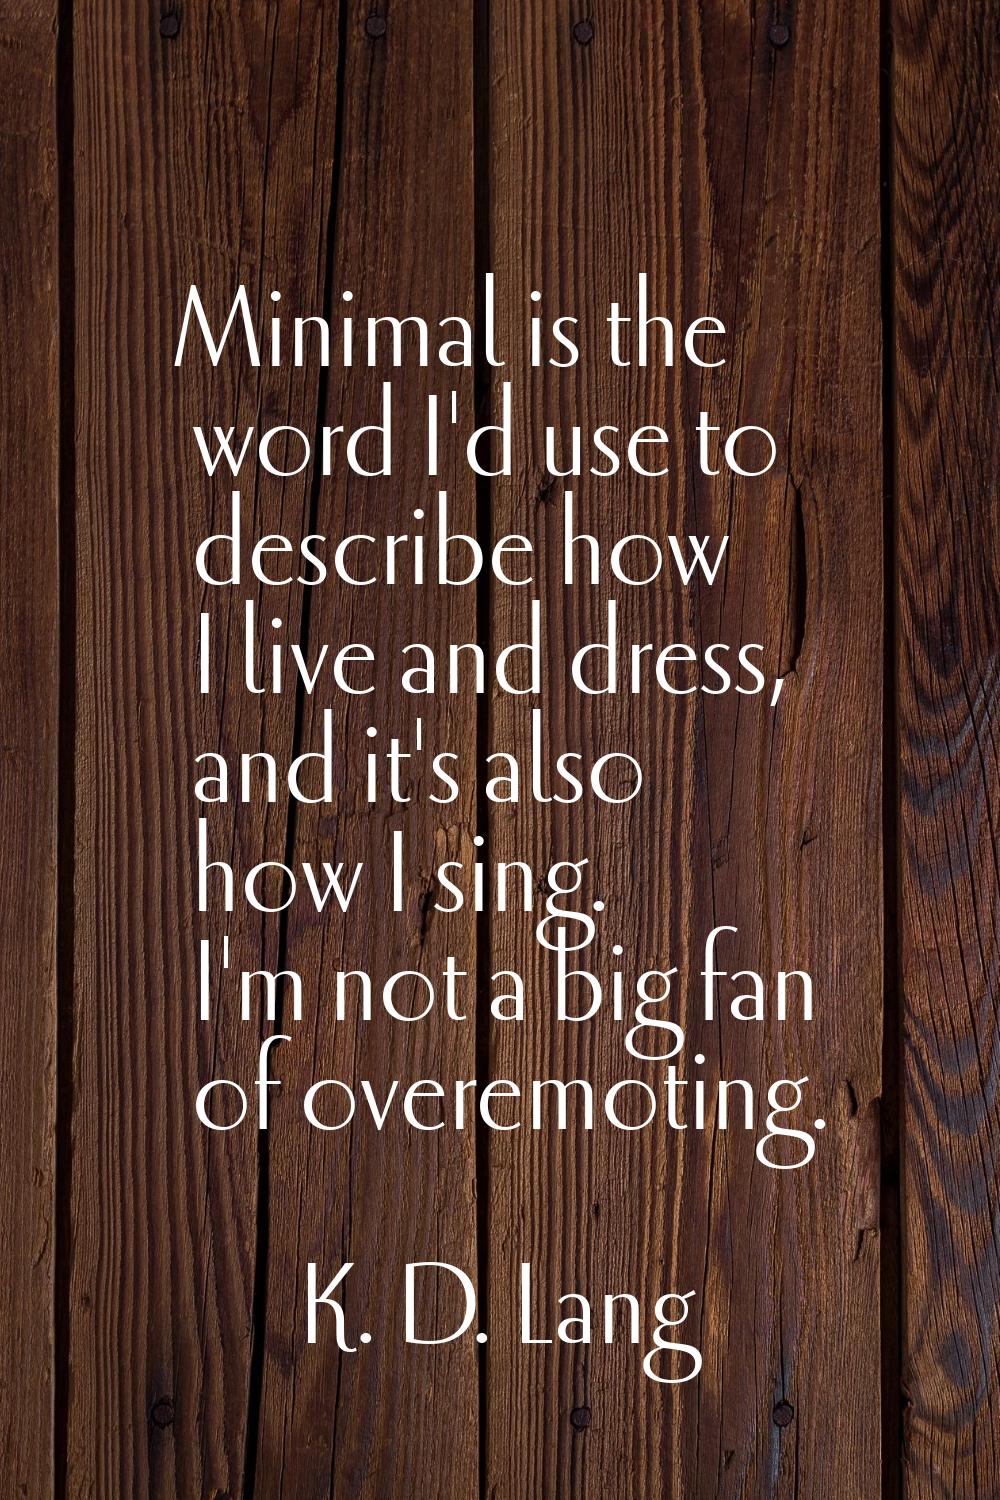 Minimal is the word I'd use to describe how I live and dress, and it's also how I sing. I'm not a b